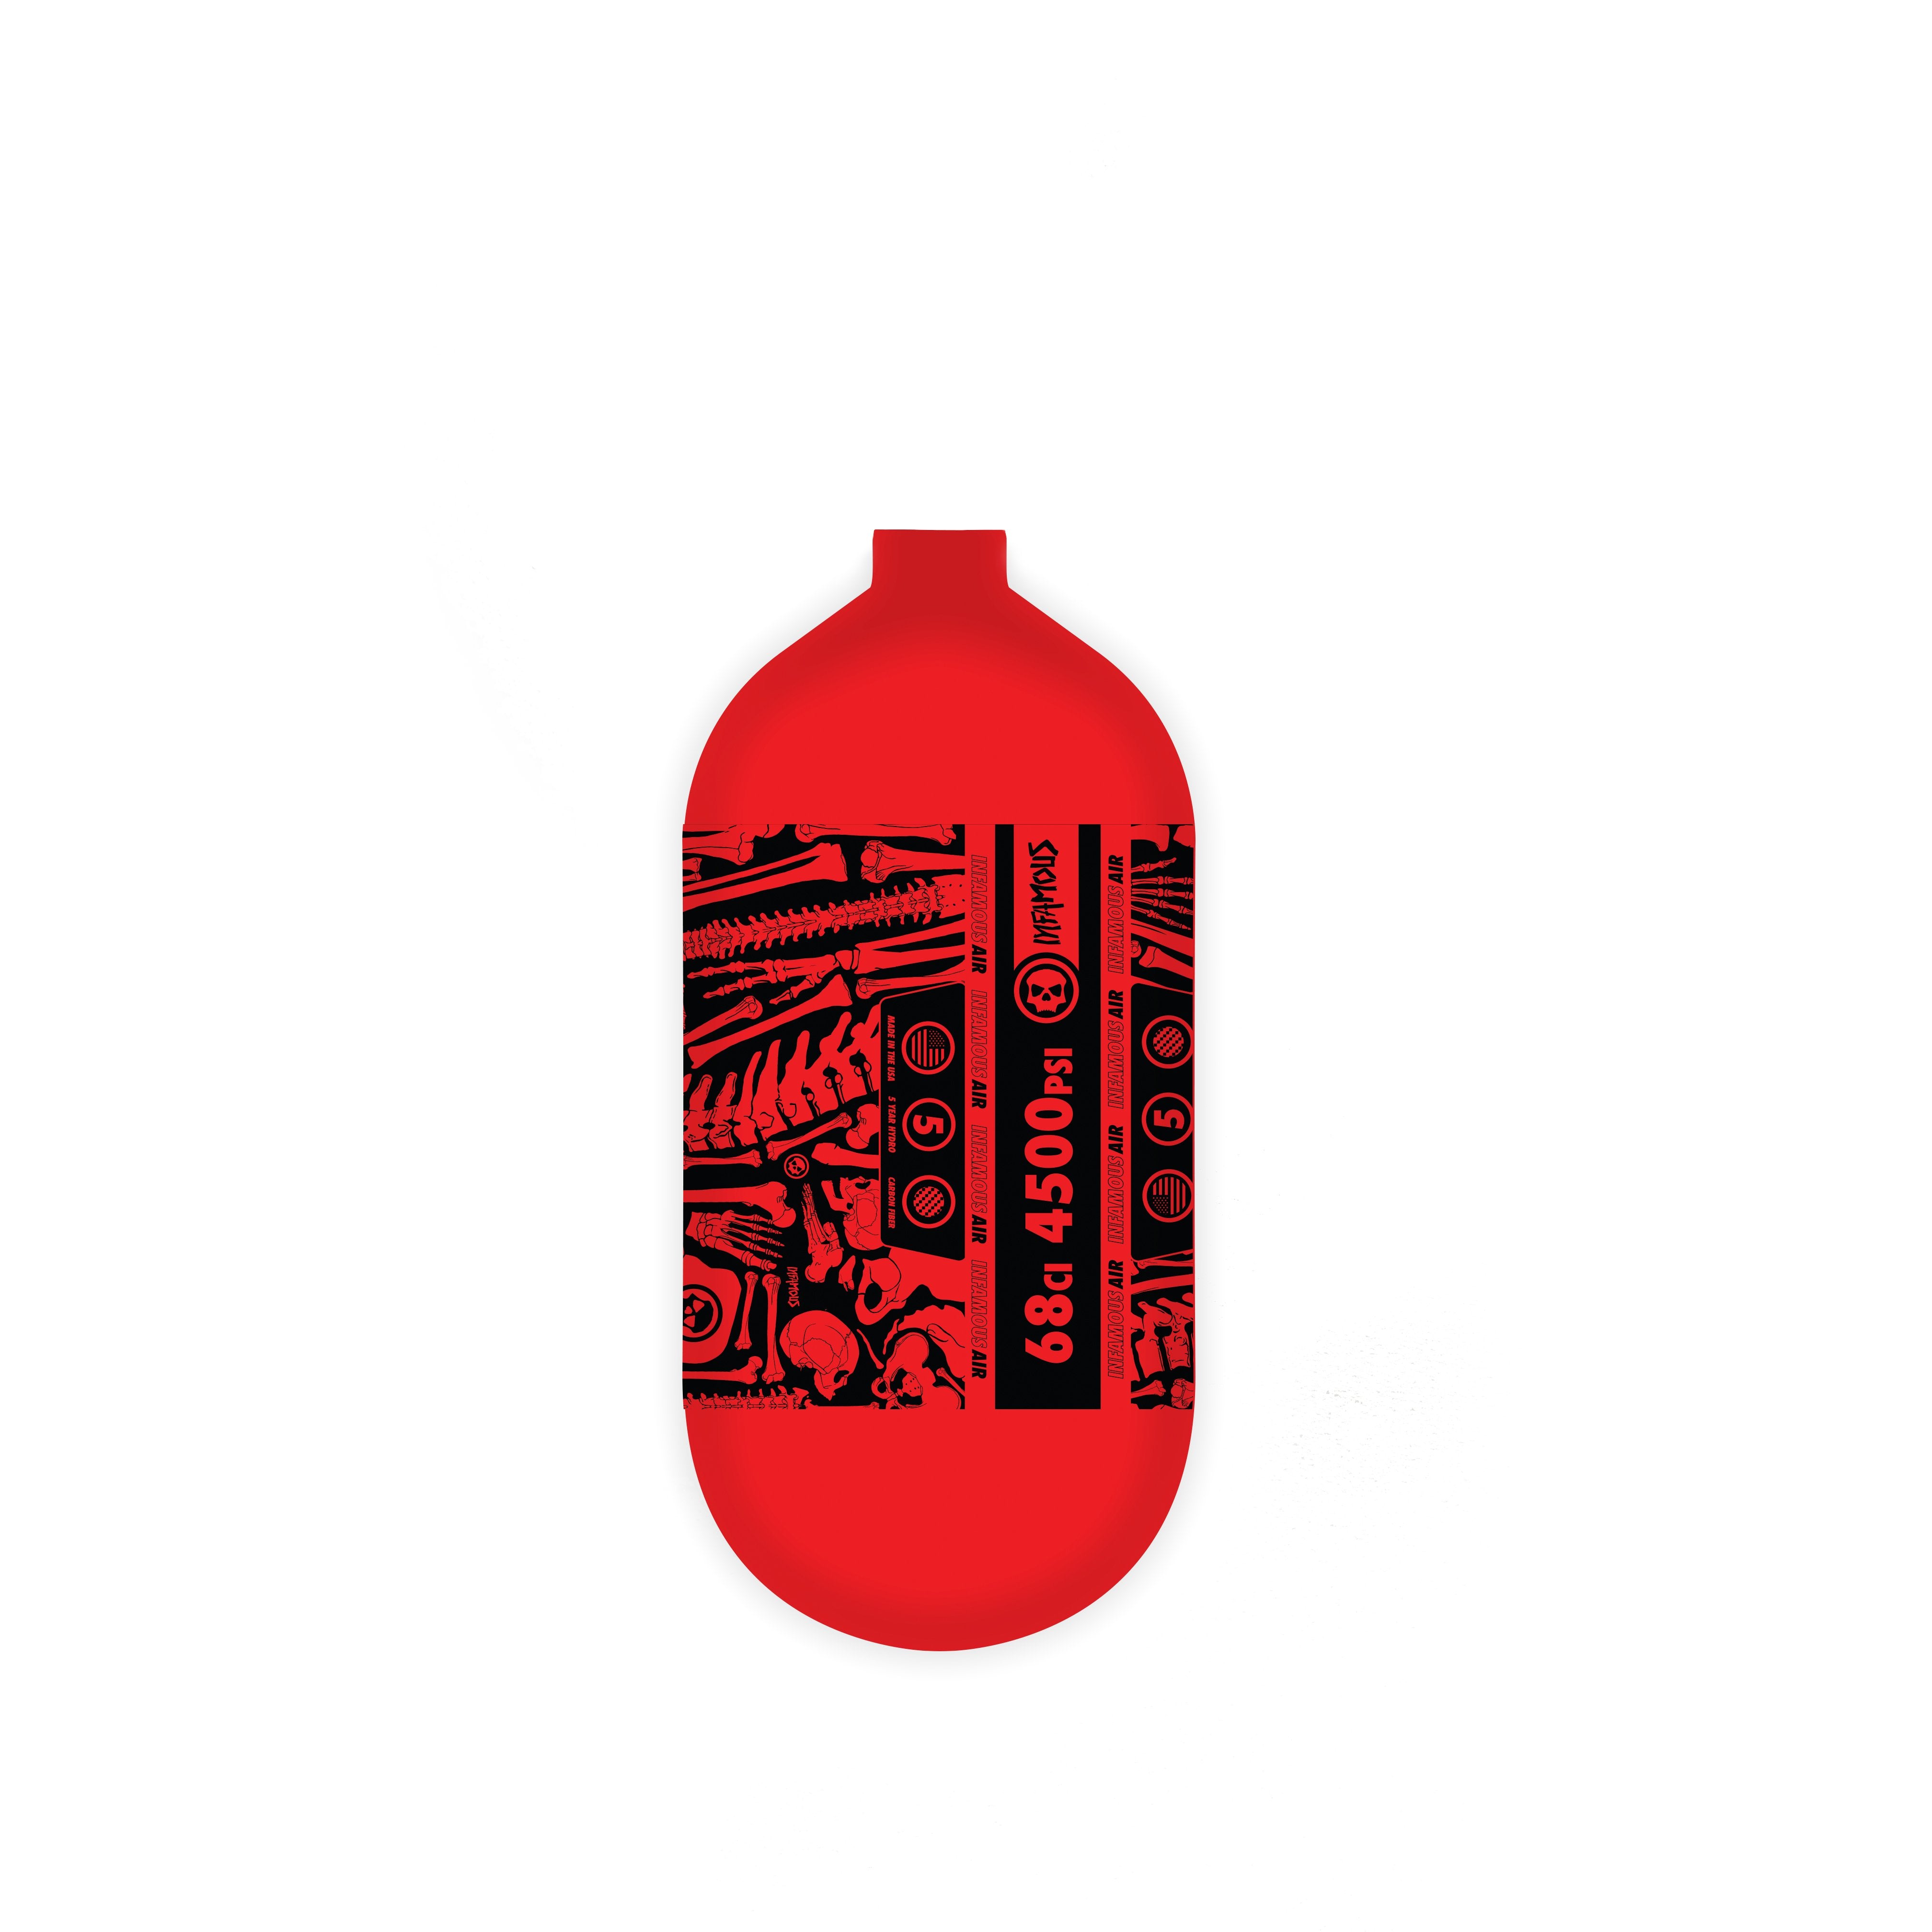 INFAMOUS AIR "BONES" Paintball Tank - BOTTLE ONLY - Red/Black - 68CI / 4500PSI